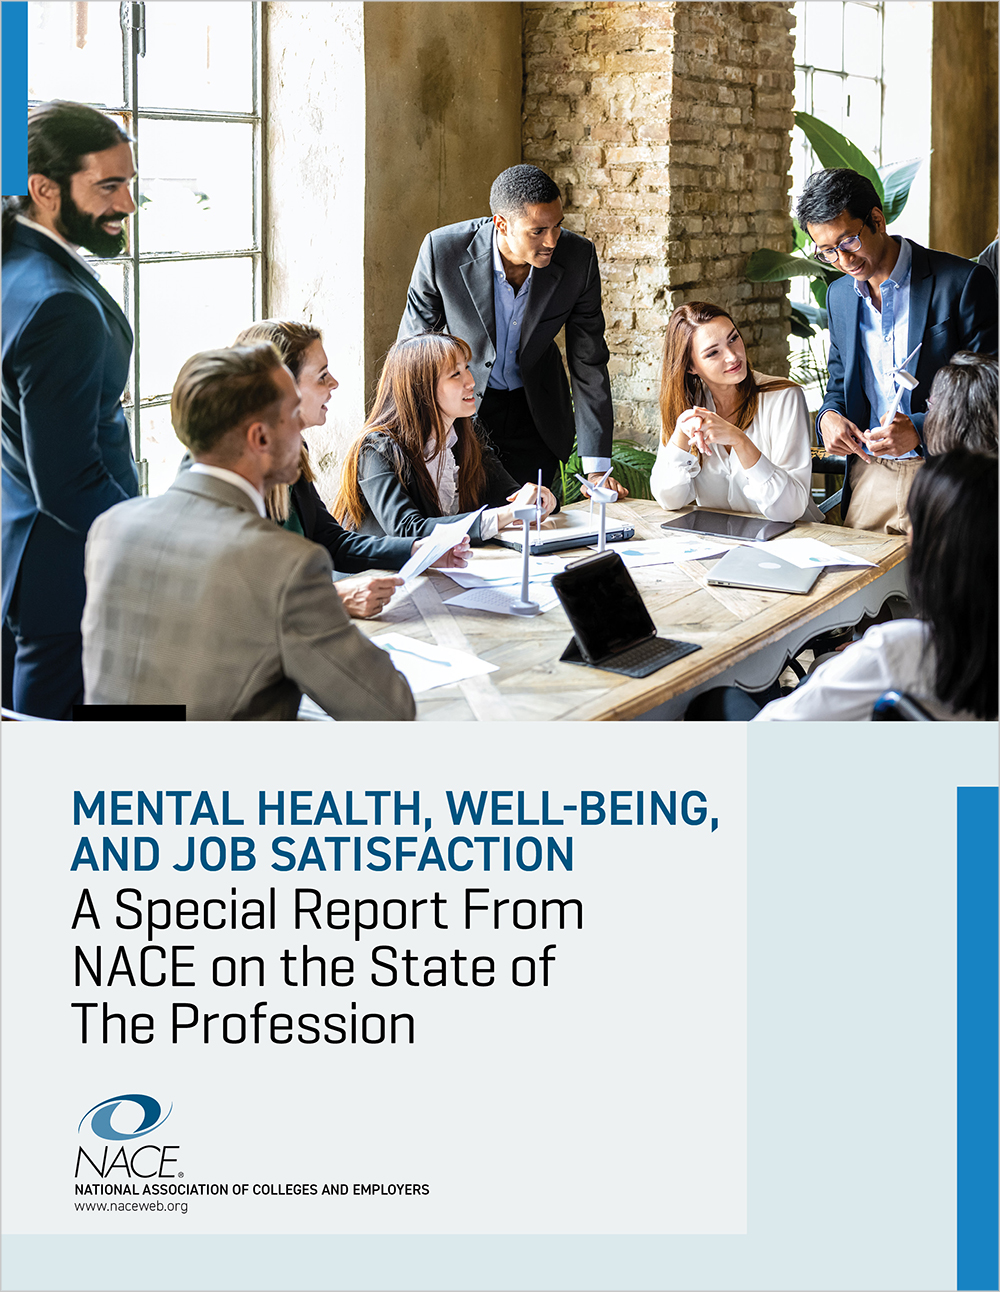 Mental Health, Well-being, and Job Satisfaction: A Special Report From NACE